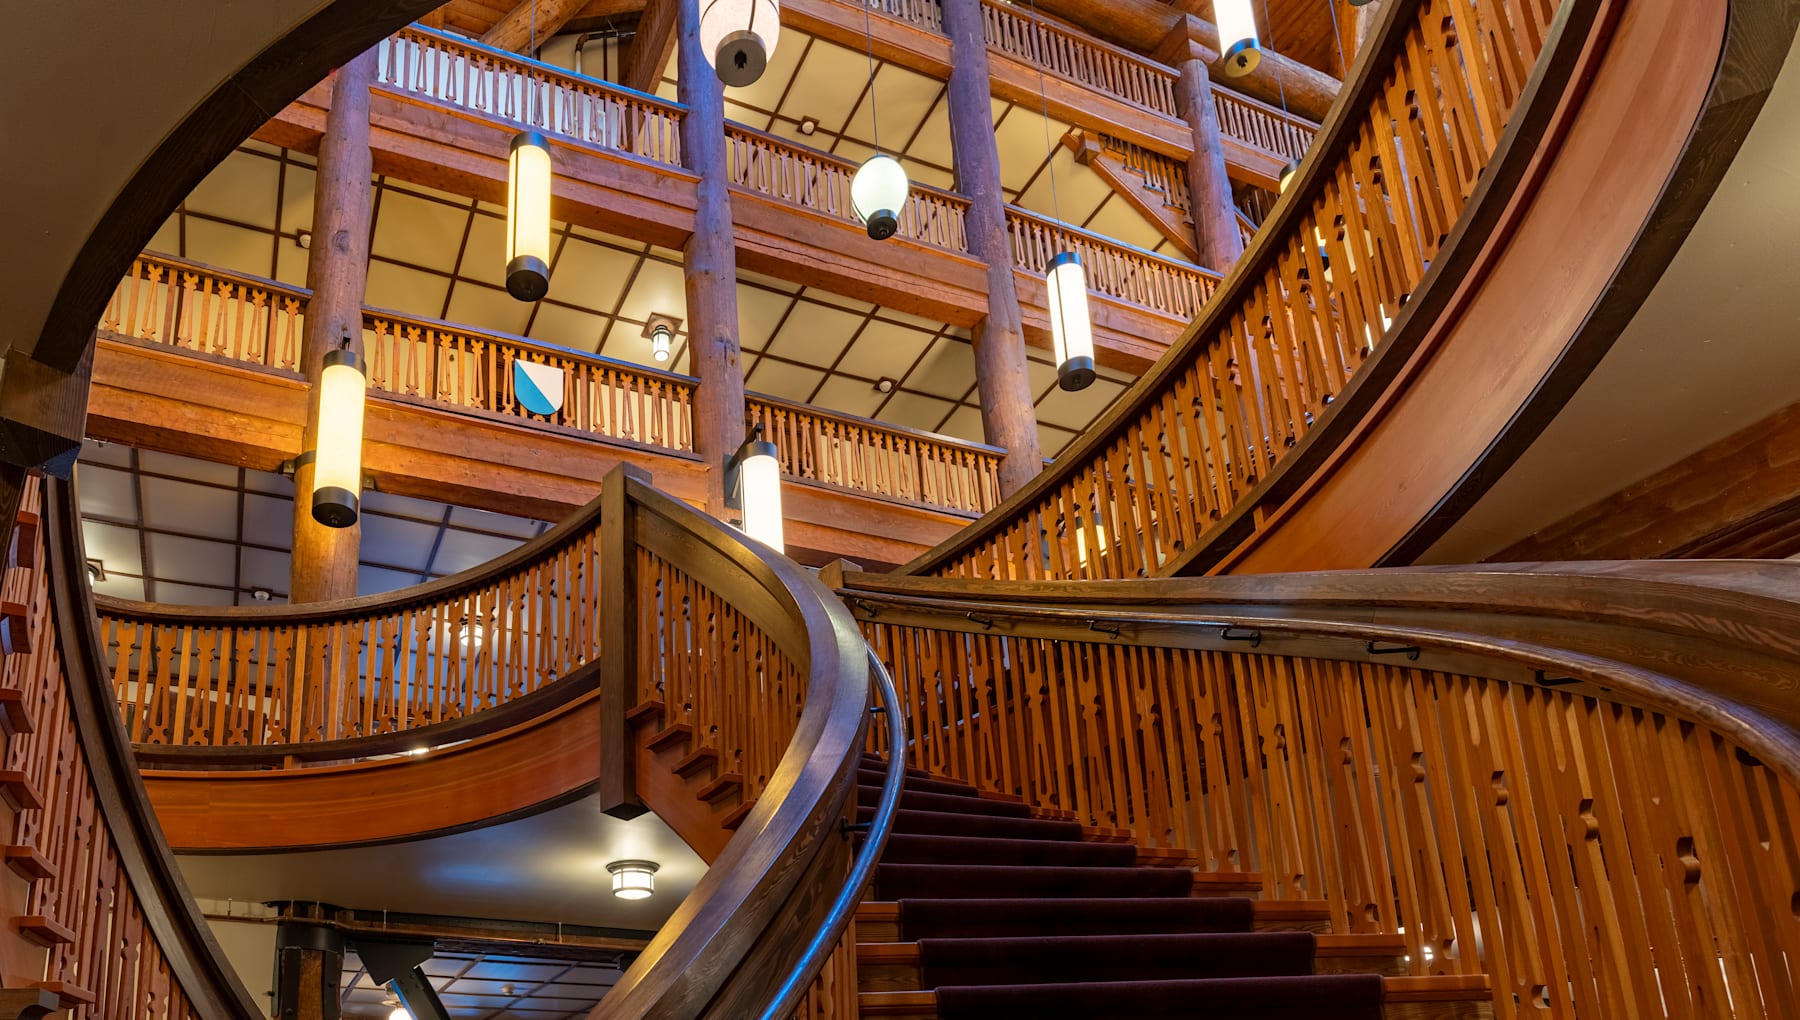 Many Glacier Hotel double helix staircase